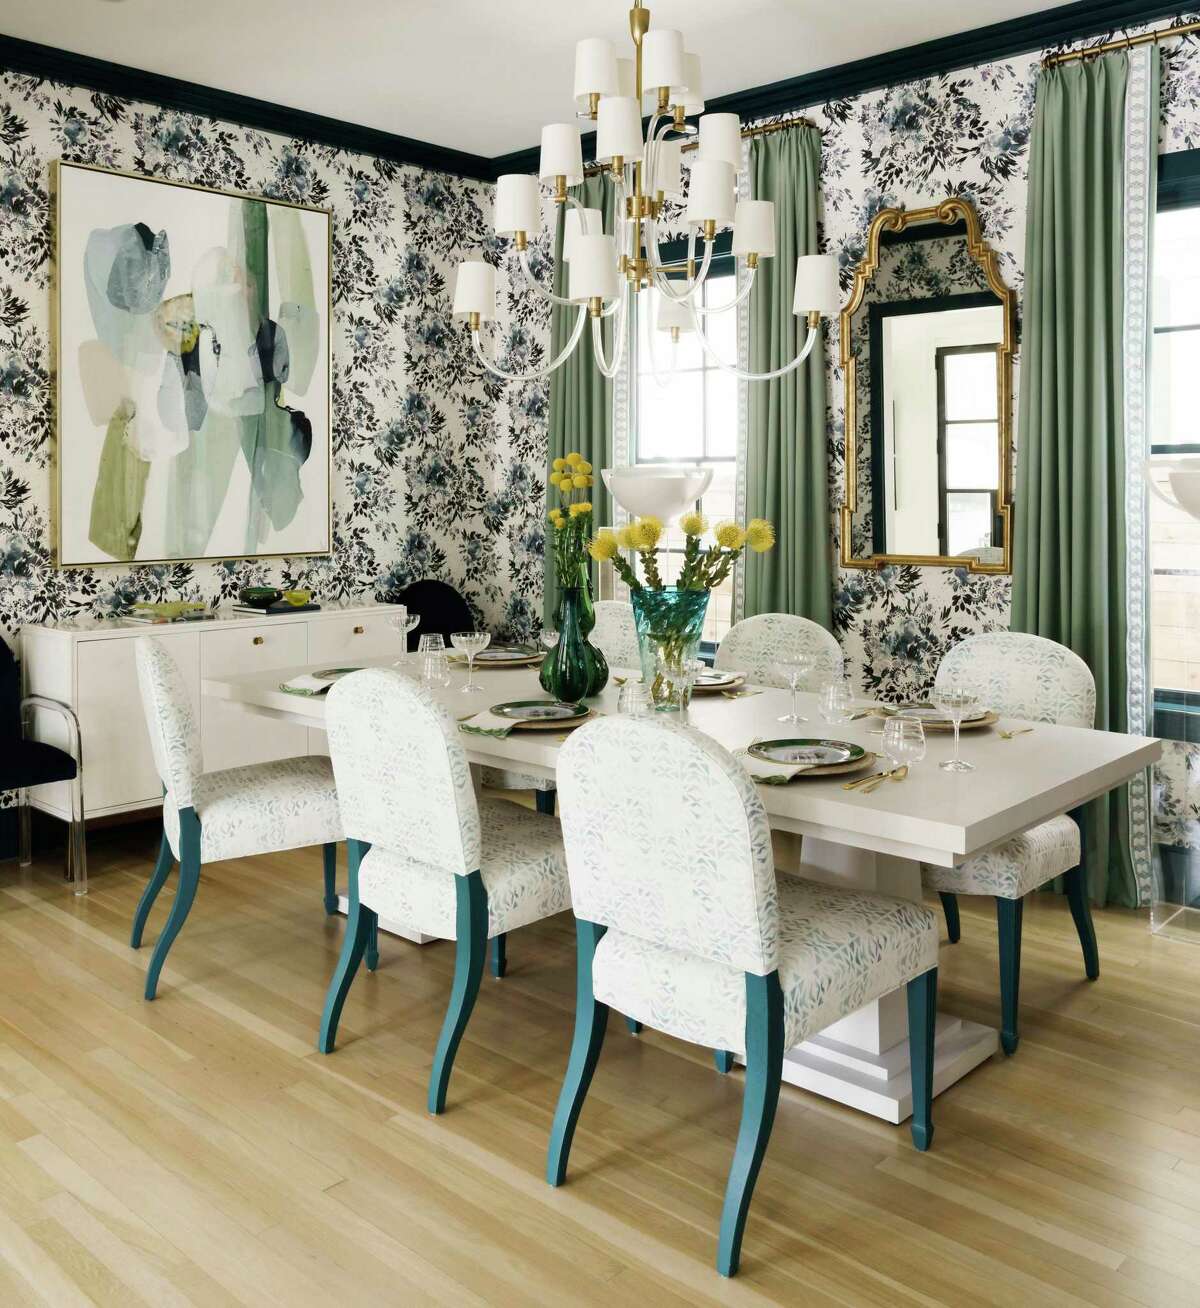 Interior designer Hallie Henley Sims approached the dining room in Julie Gimlett’s Woodland Heights home with layers of color and texture.